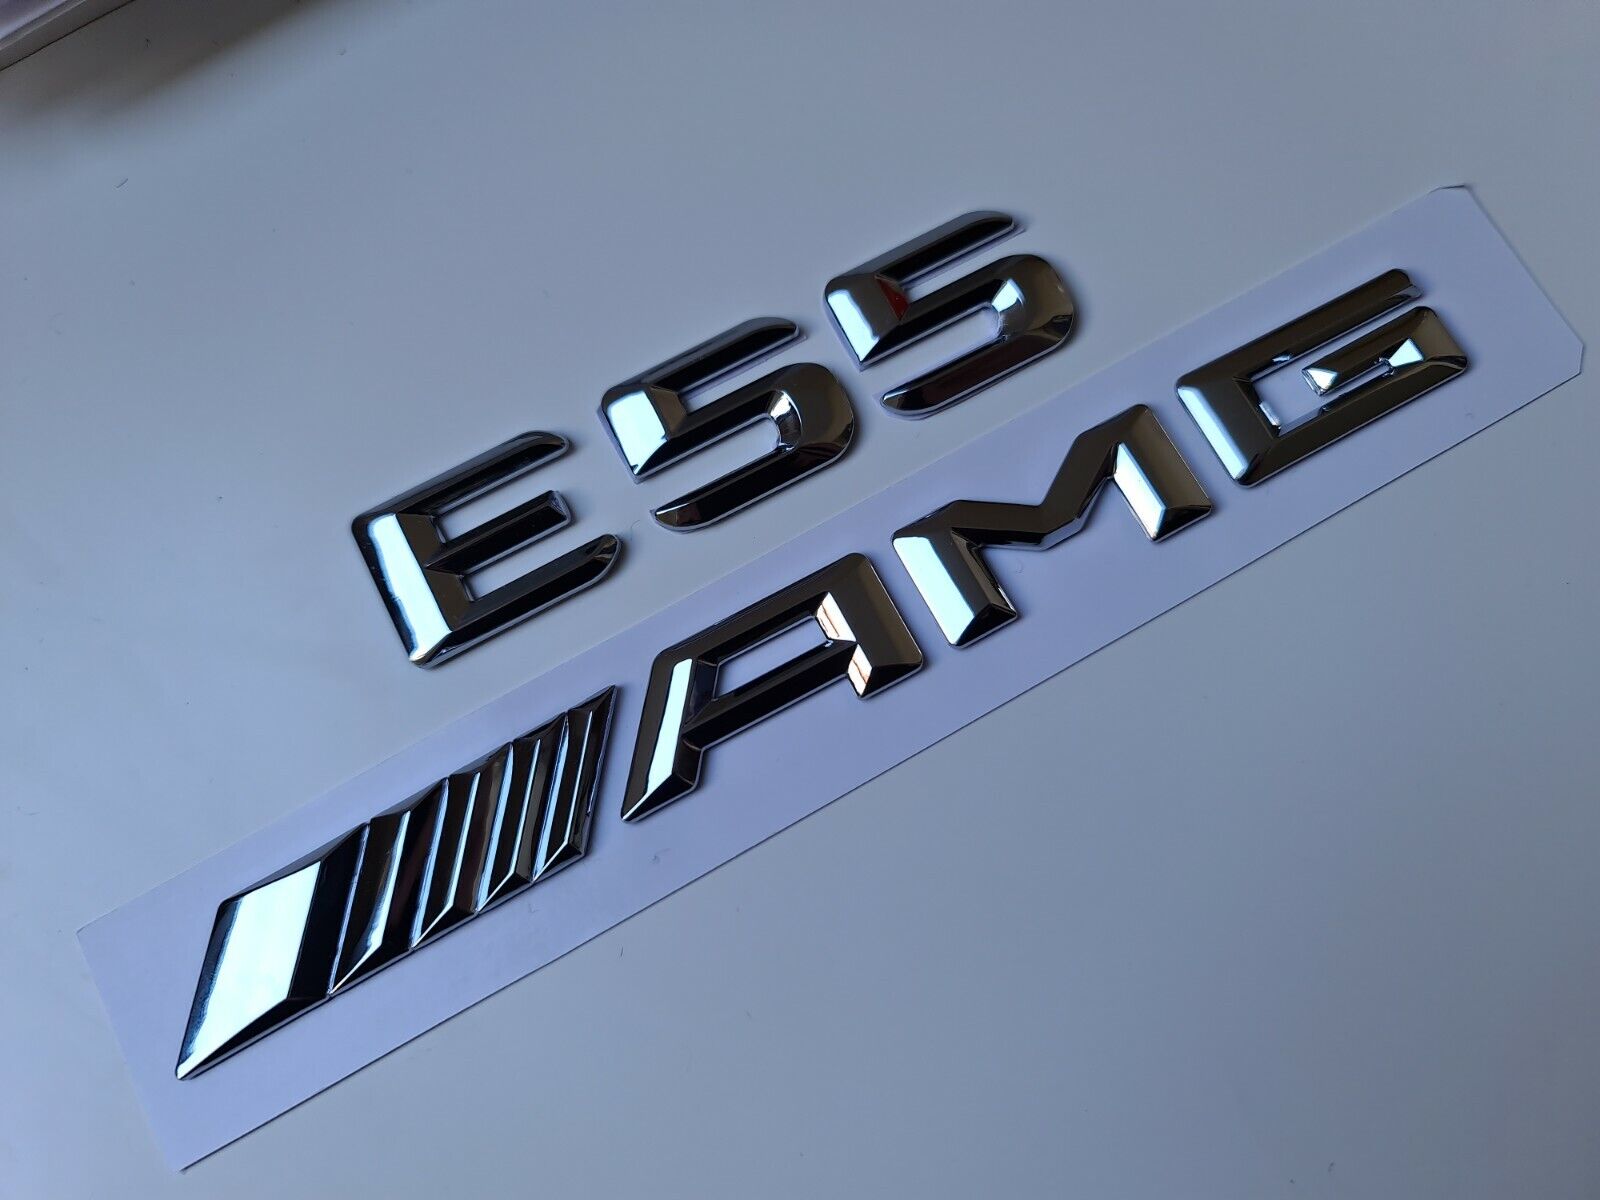 E55 AMG Silver /Chrome Letter Number Rear Boot Badge Emblem For Mercedes E Class